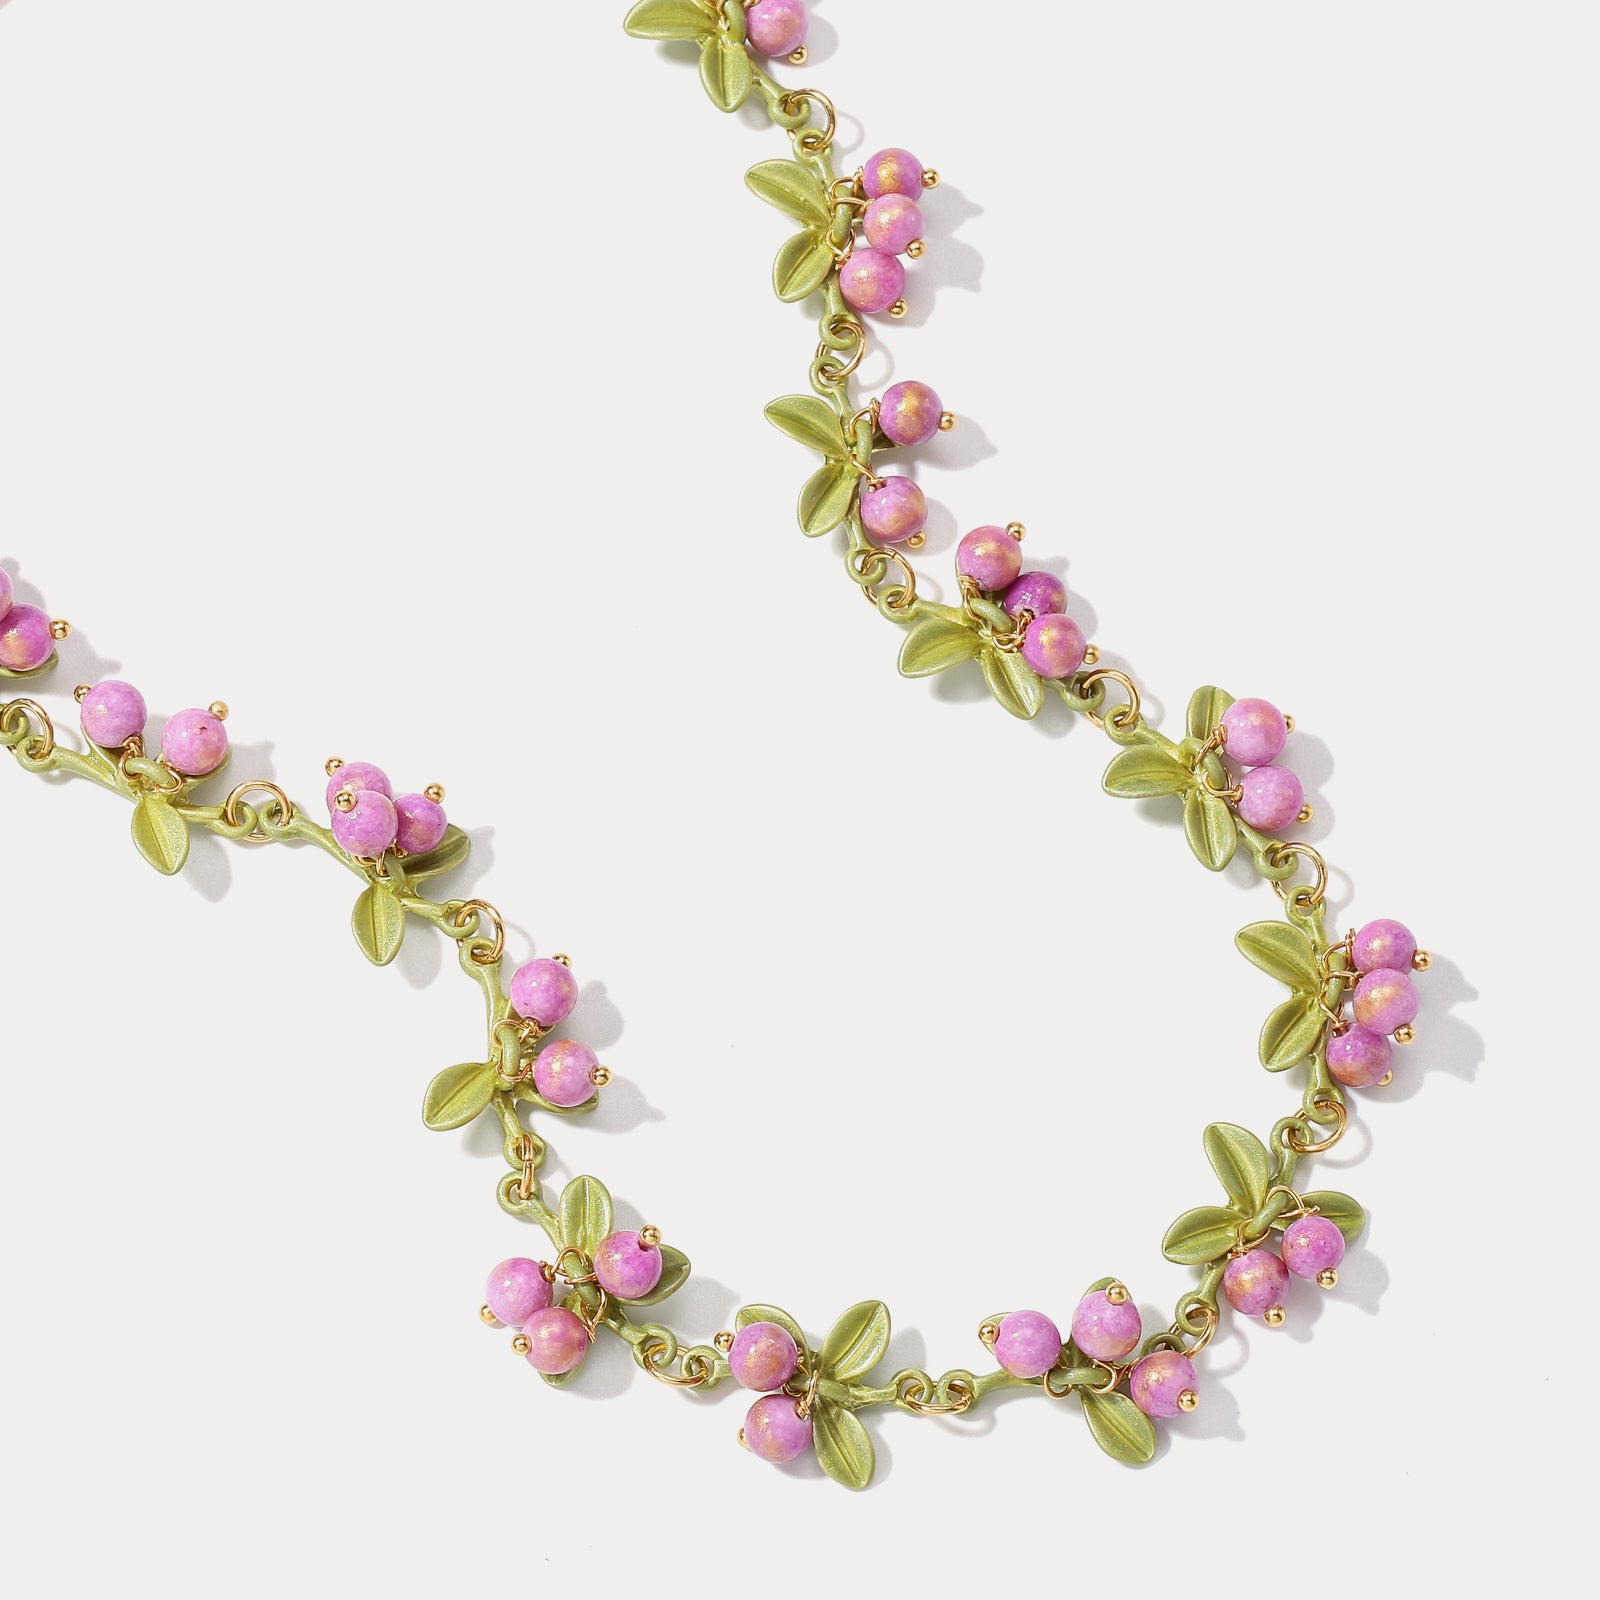 Beautyberry Necklace Orchard Jewelry